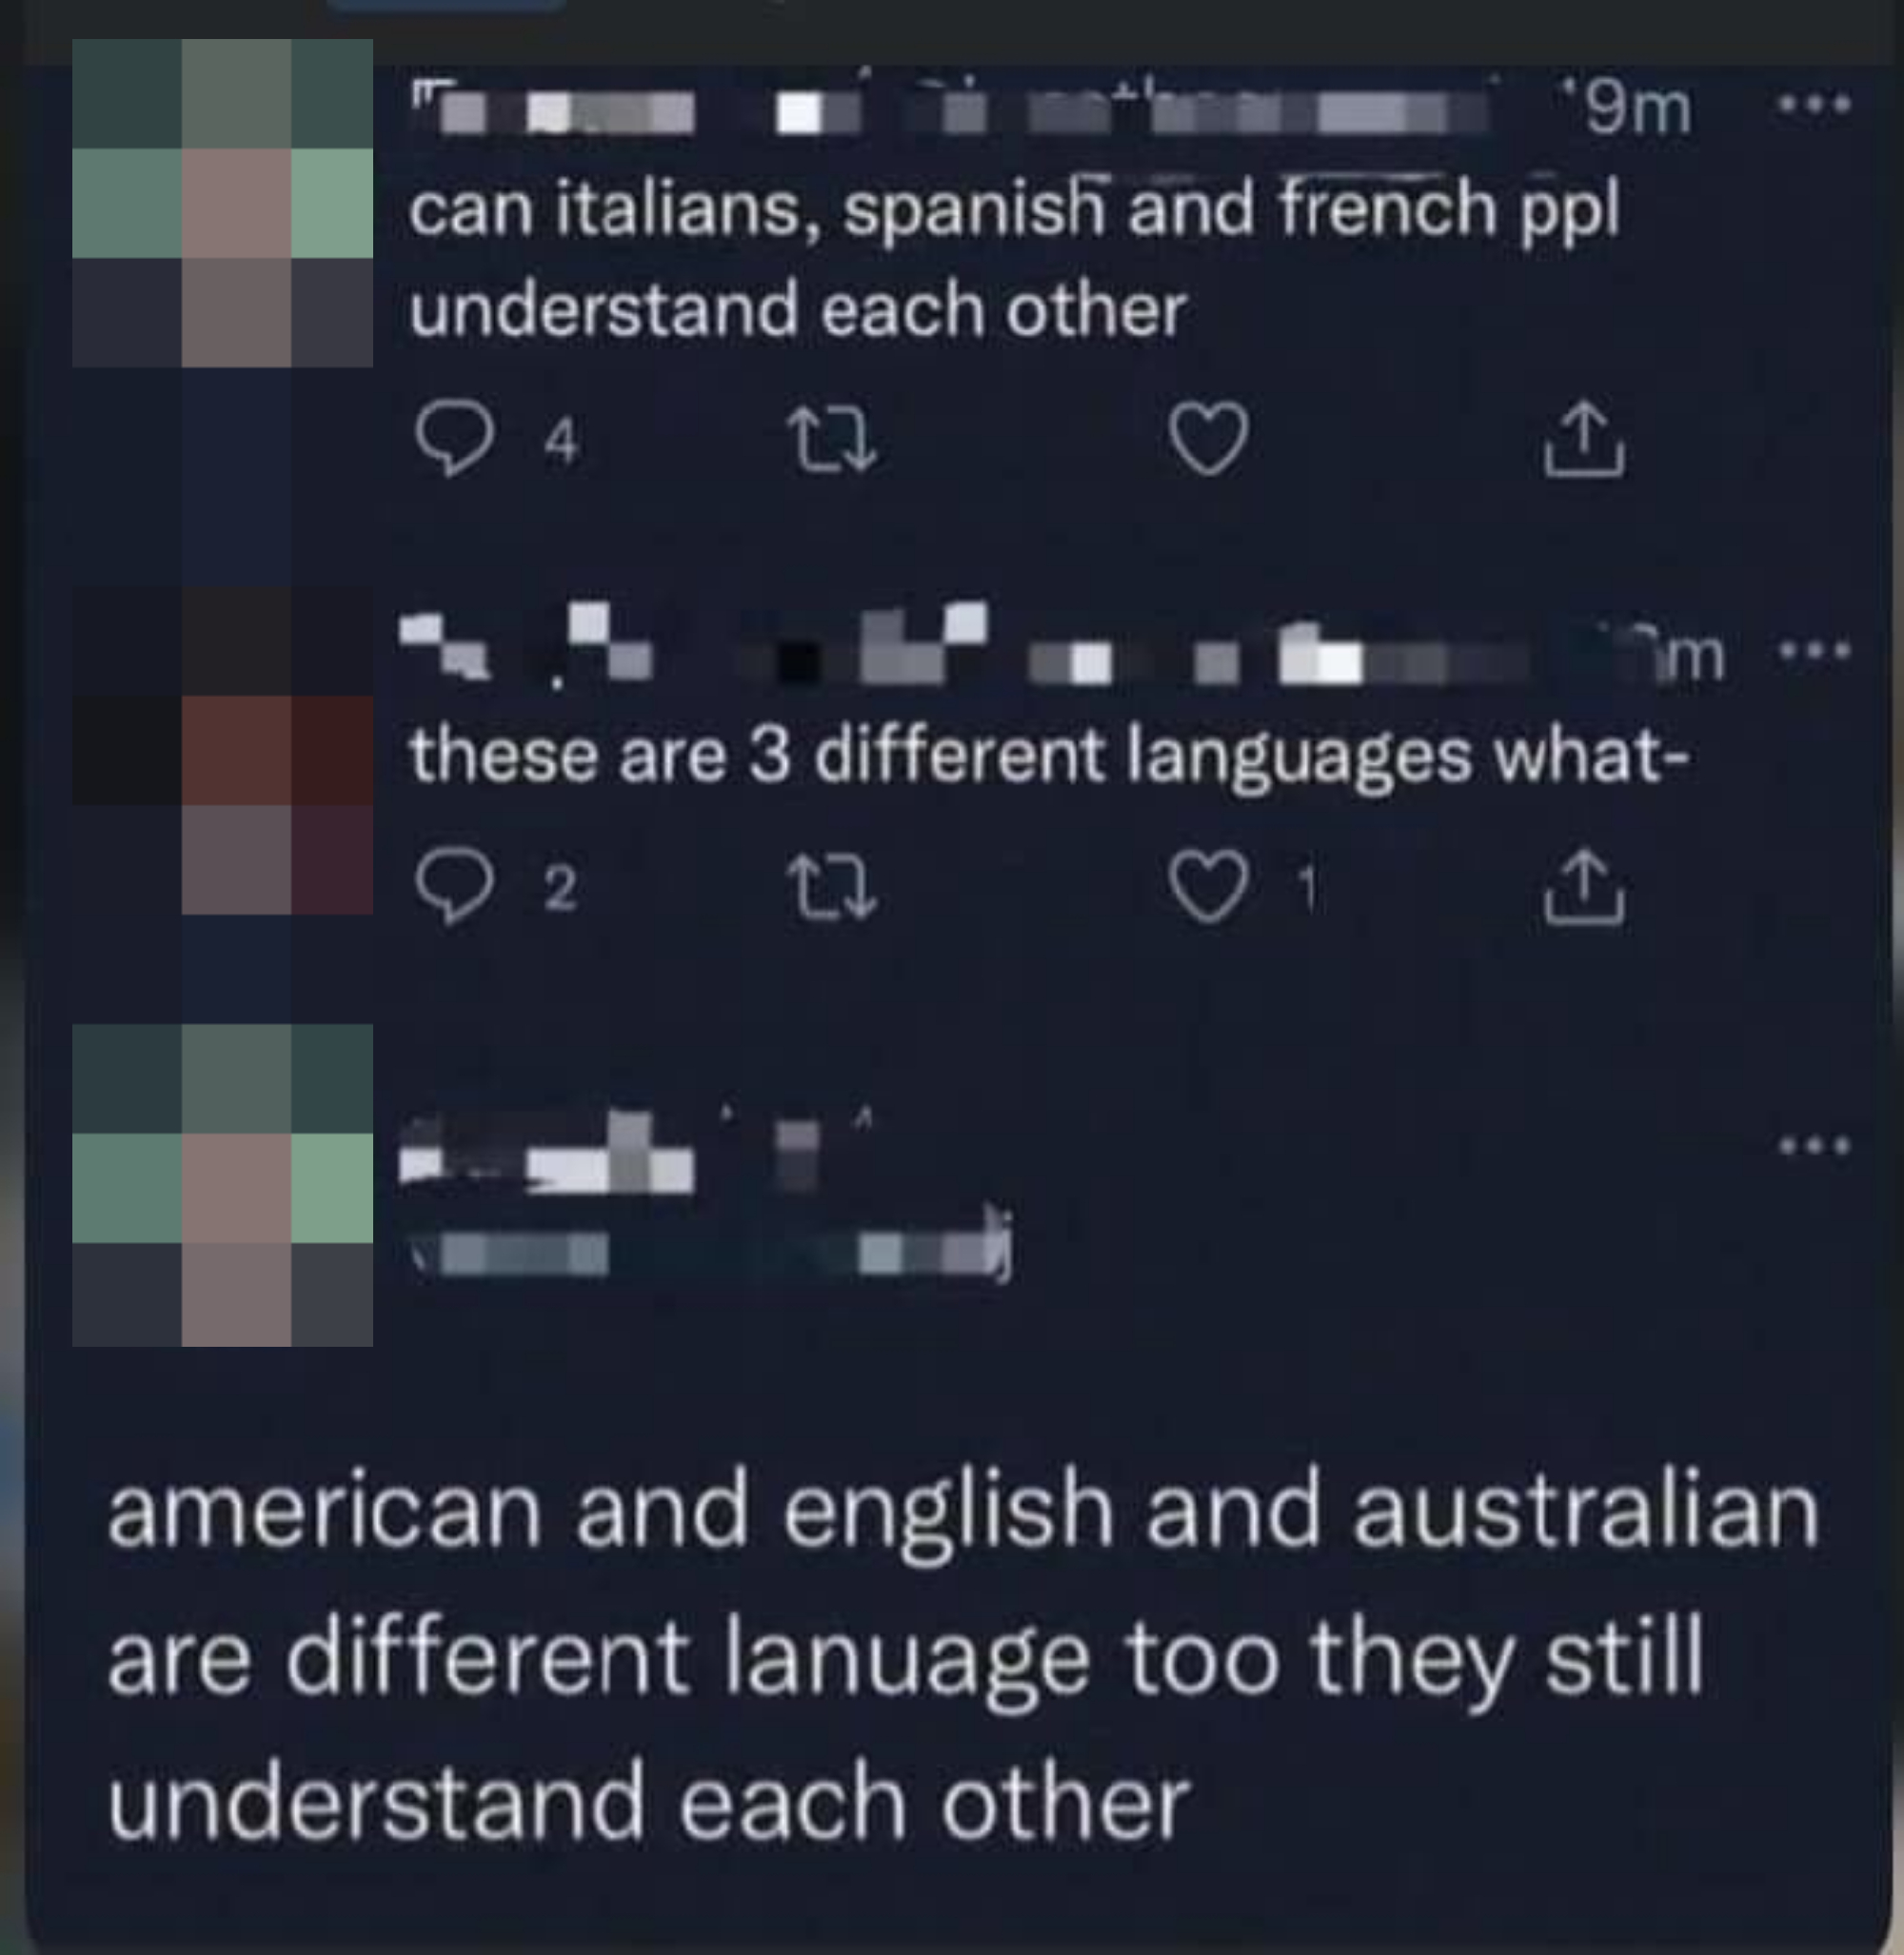 &quot;American and English and Australian are different languages&quot;